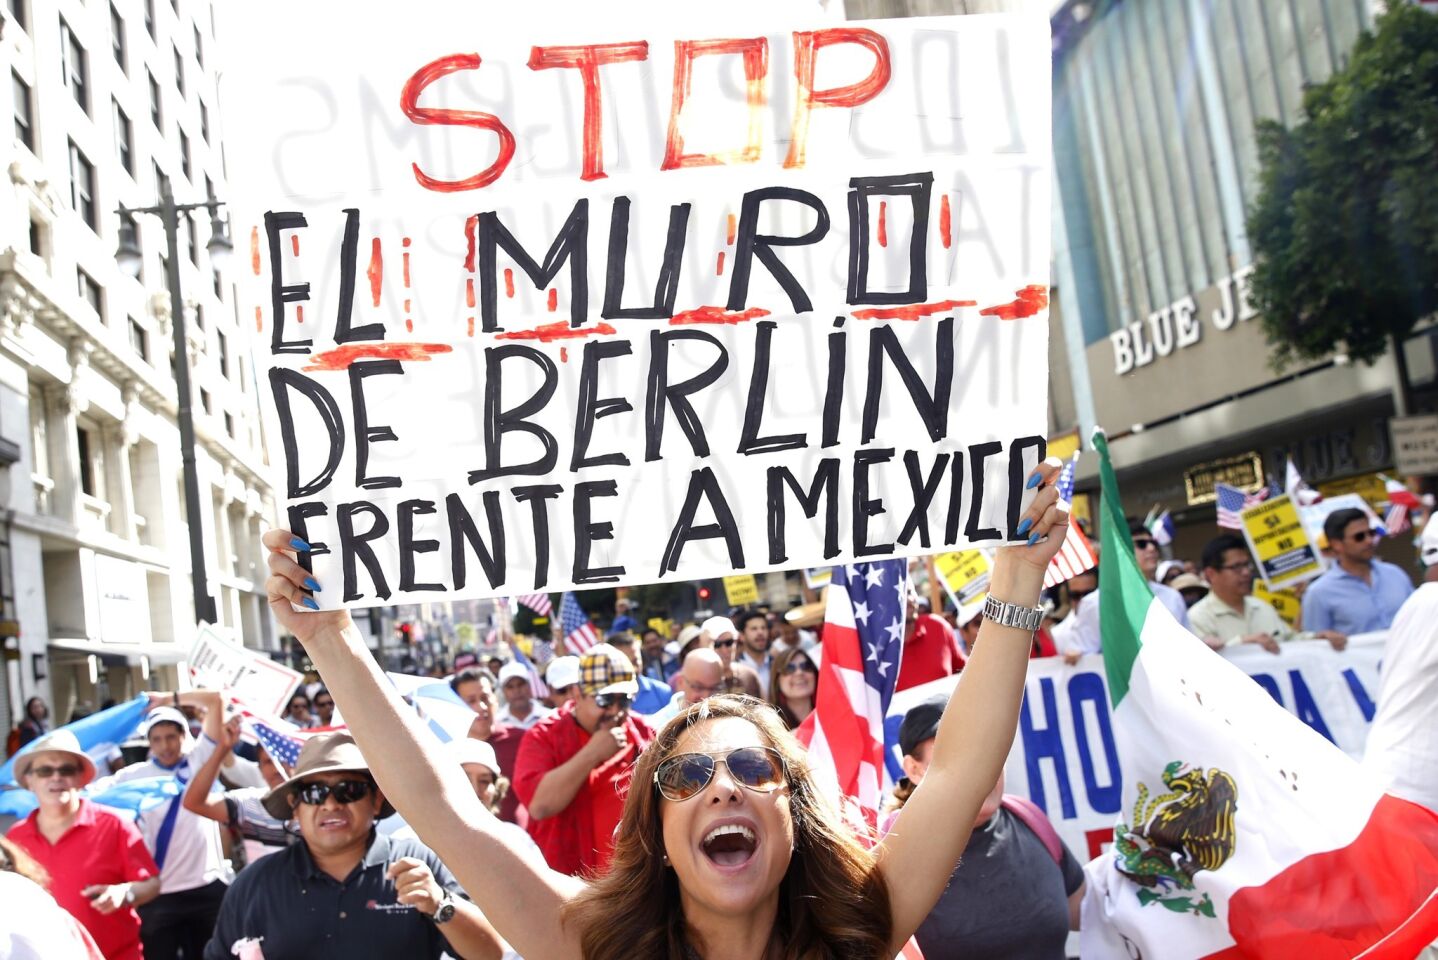 People rally for immigration reform on Broadway during May Day protests downtown Los Angeles.